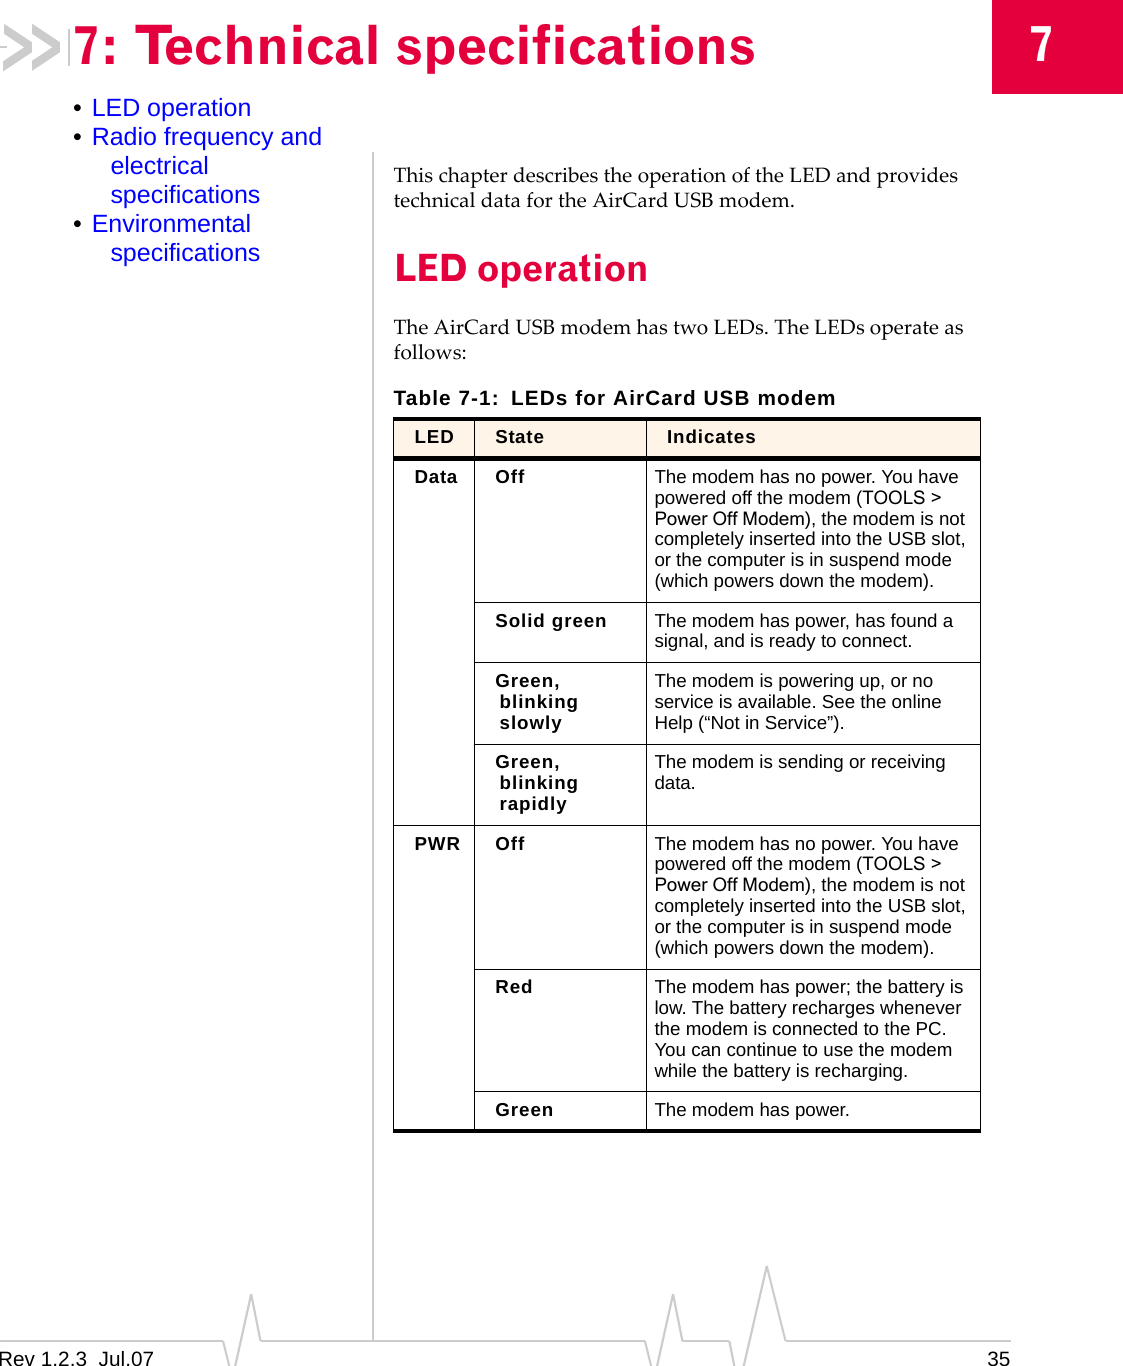 Rev 1.2.3  Jul.07 3577: Technical specifications•LED operation•Radio frequency and electrical specifications•Environmental specificationsThischapterdescribestheoperationoftheLEDandprovidestechnicaldatafortheAirCardUSBmodem.LED operationTheAirCardUSBmodemhastwoLEDs.TheLEDsoperateasfollows:Table 7-1: LEDs for AirCard USB modemLED State IndicatesData Off The modem has no power. You have powered off the modem (TOOLS &gt; Power Off Modem), the modem is not completely inserted into the USB slot, or the computer is in suspend mode (which powers down the modem).Solid green The modem has power, has found a signal, and is ready to connect. Green,blinking slowlyThe modem is powering up, or no service is available. See the online Help (“Not in Service”). Green,blinking rapidlyThe modem is sending or receiving data. PWR Off The modem has no power. You have powered off the modem (TOOLS &gt; Power Off Modem), the modem is not completely inserted into the USB slot, or the computer is in suspend mode (which powers down the modem). Red The modem has power; the battery is low. The battery recharges whenever the modem is connected to the PC. You can continue to use the modem while the battery is recharging. Green The modem has power.